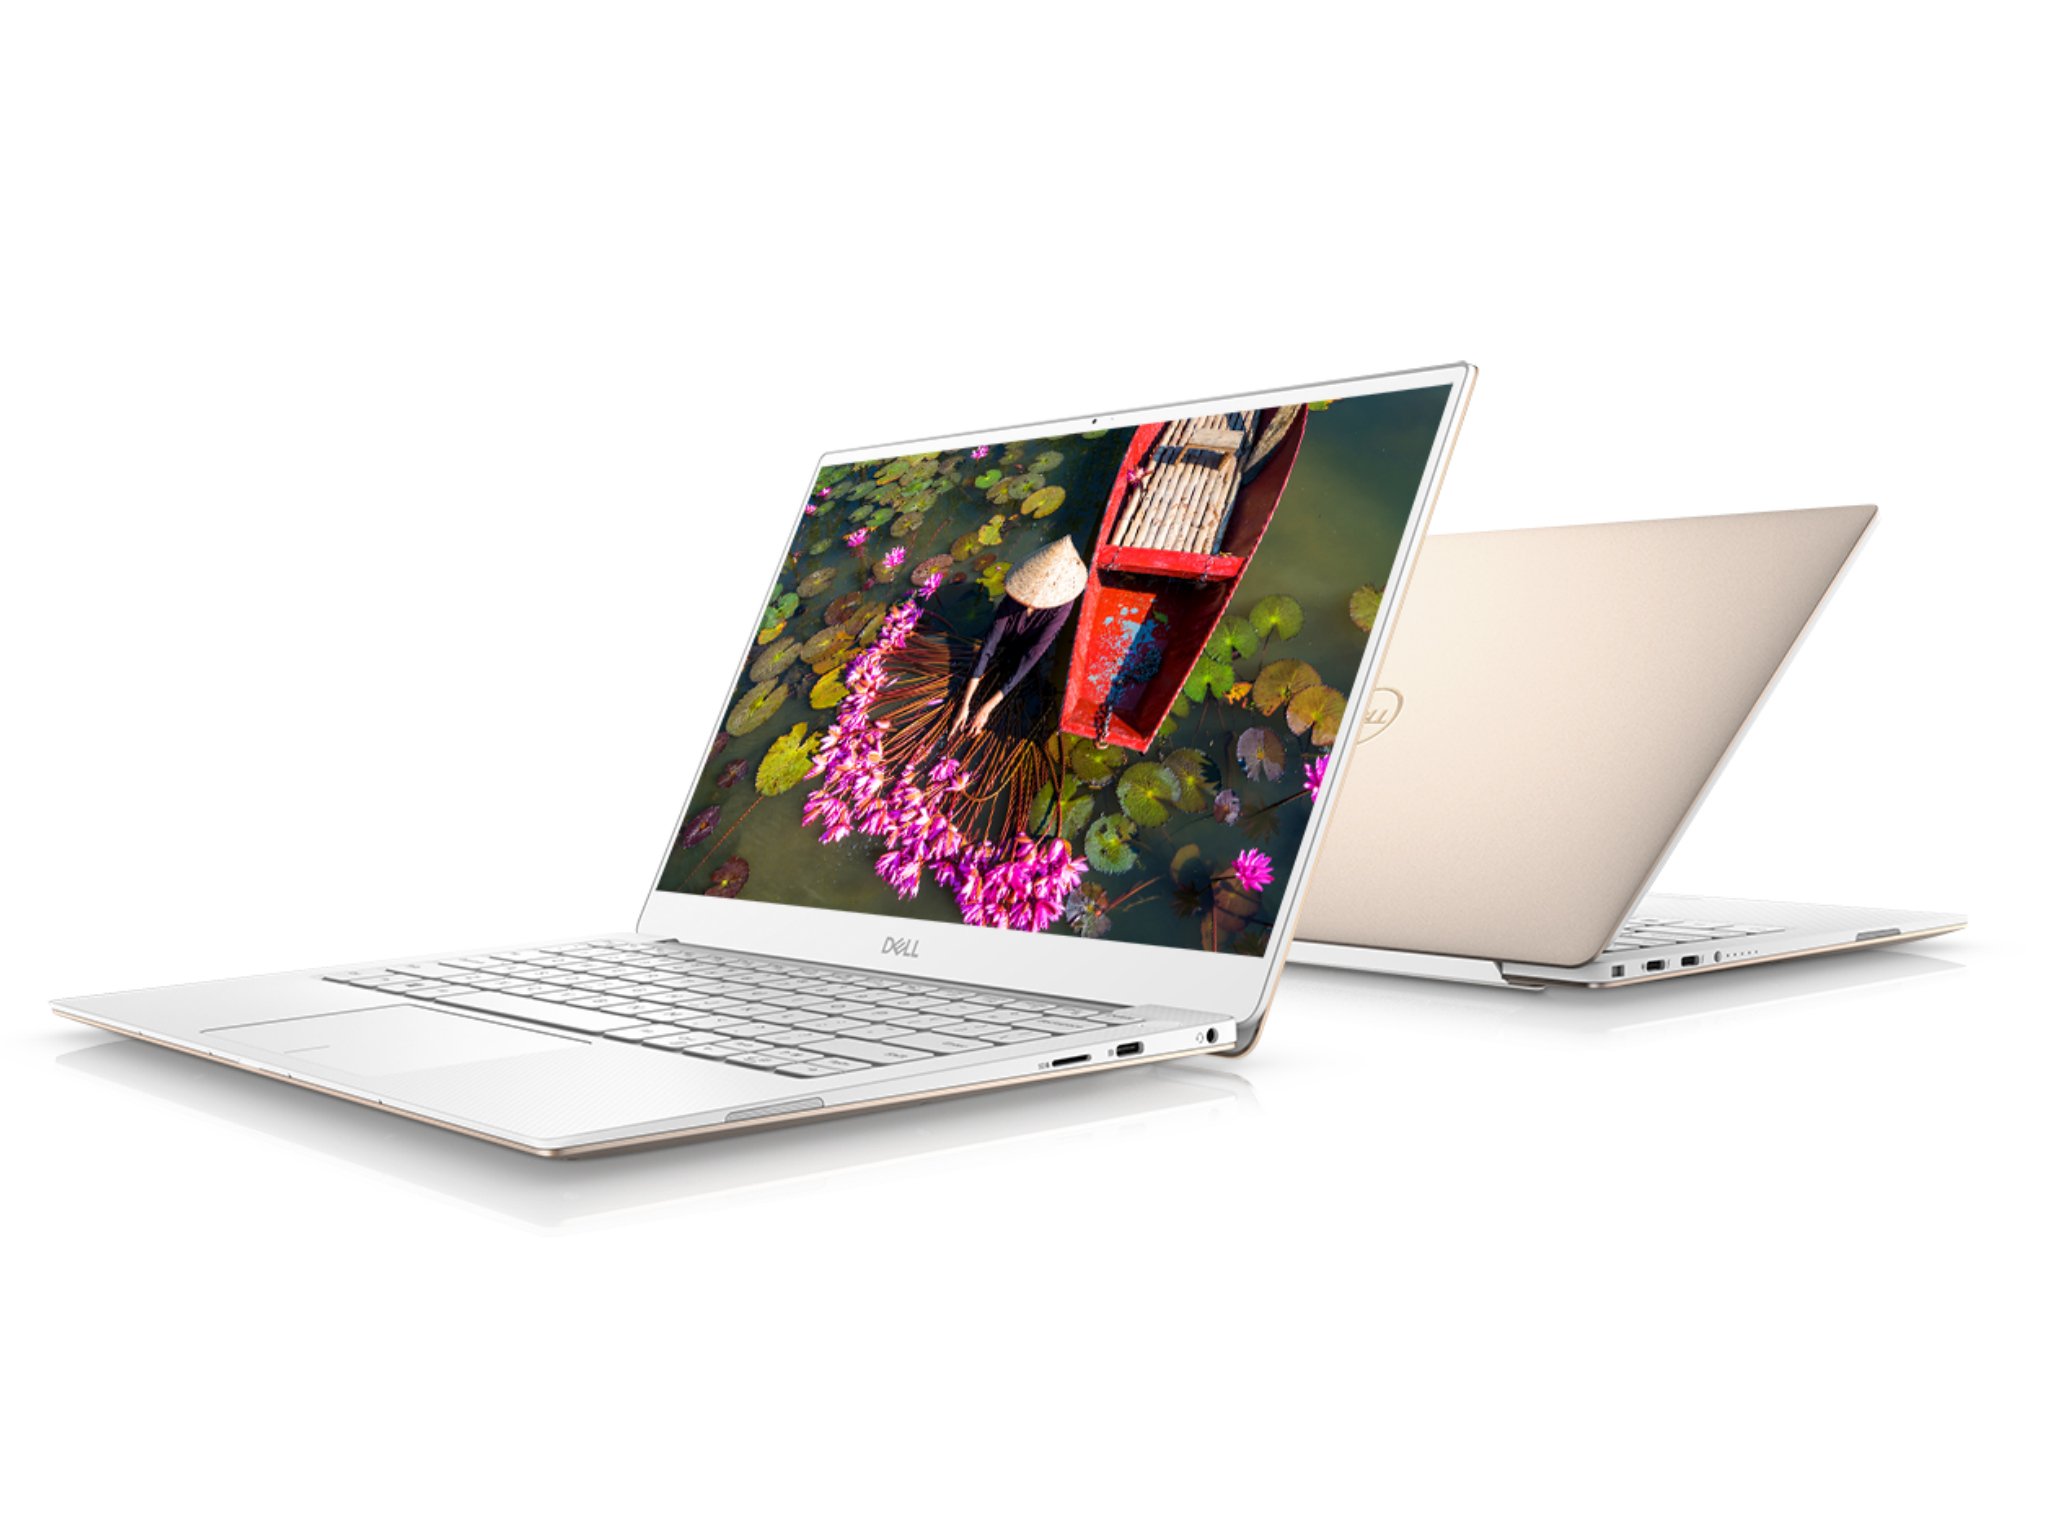 Huawei MateBook 13 vs. Dell XPS 13: Which should you buy